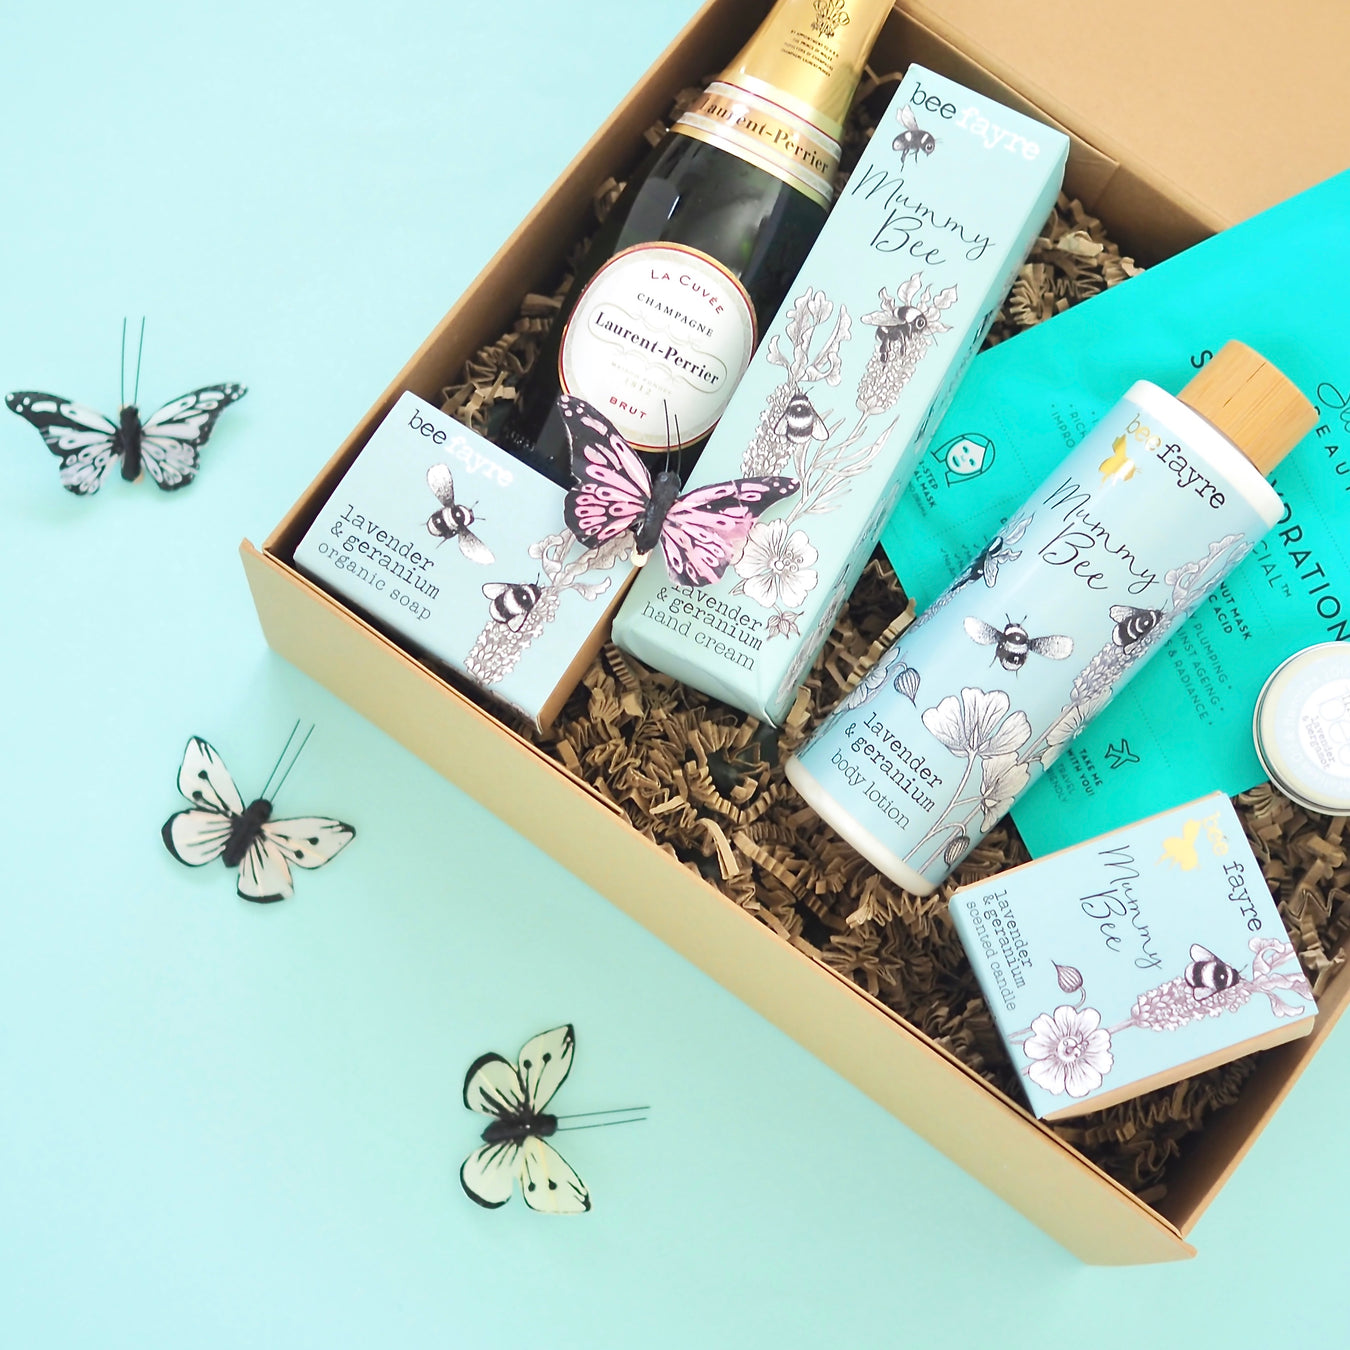 Build Your Own Gift Box Care Package